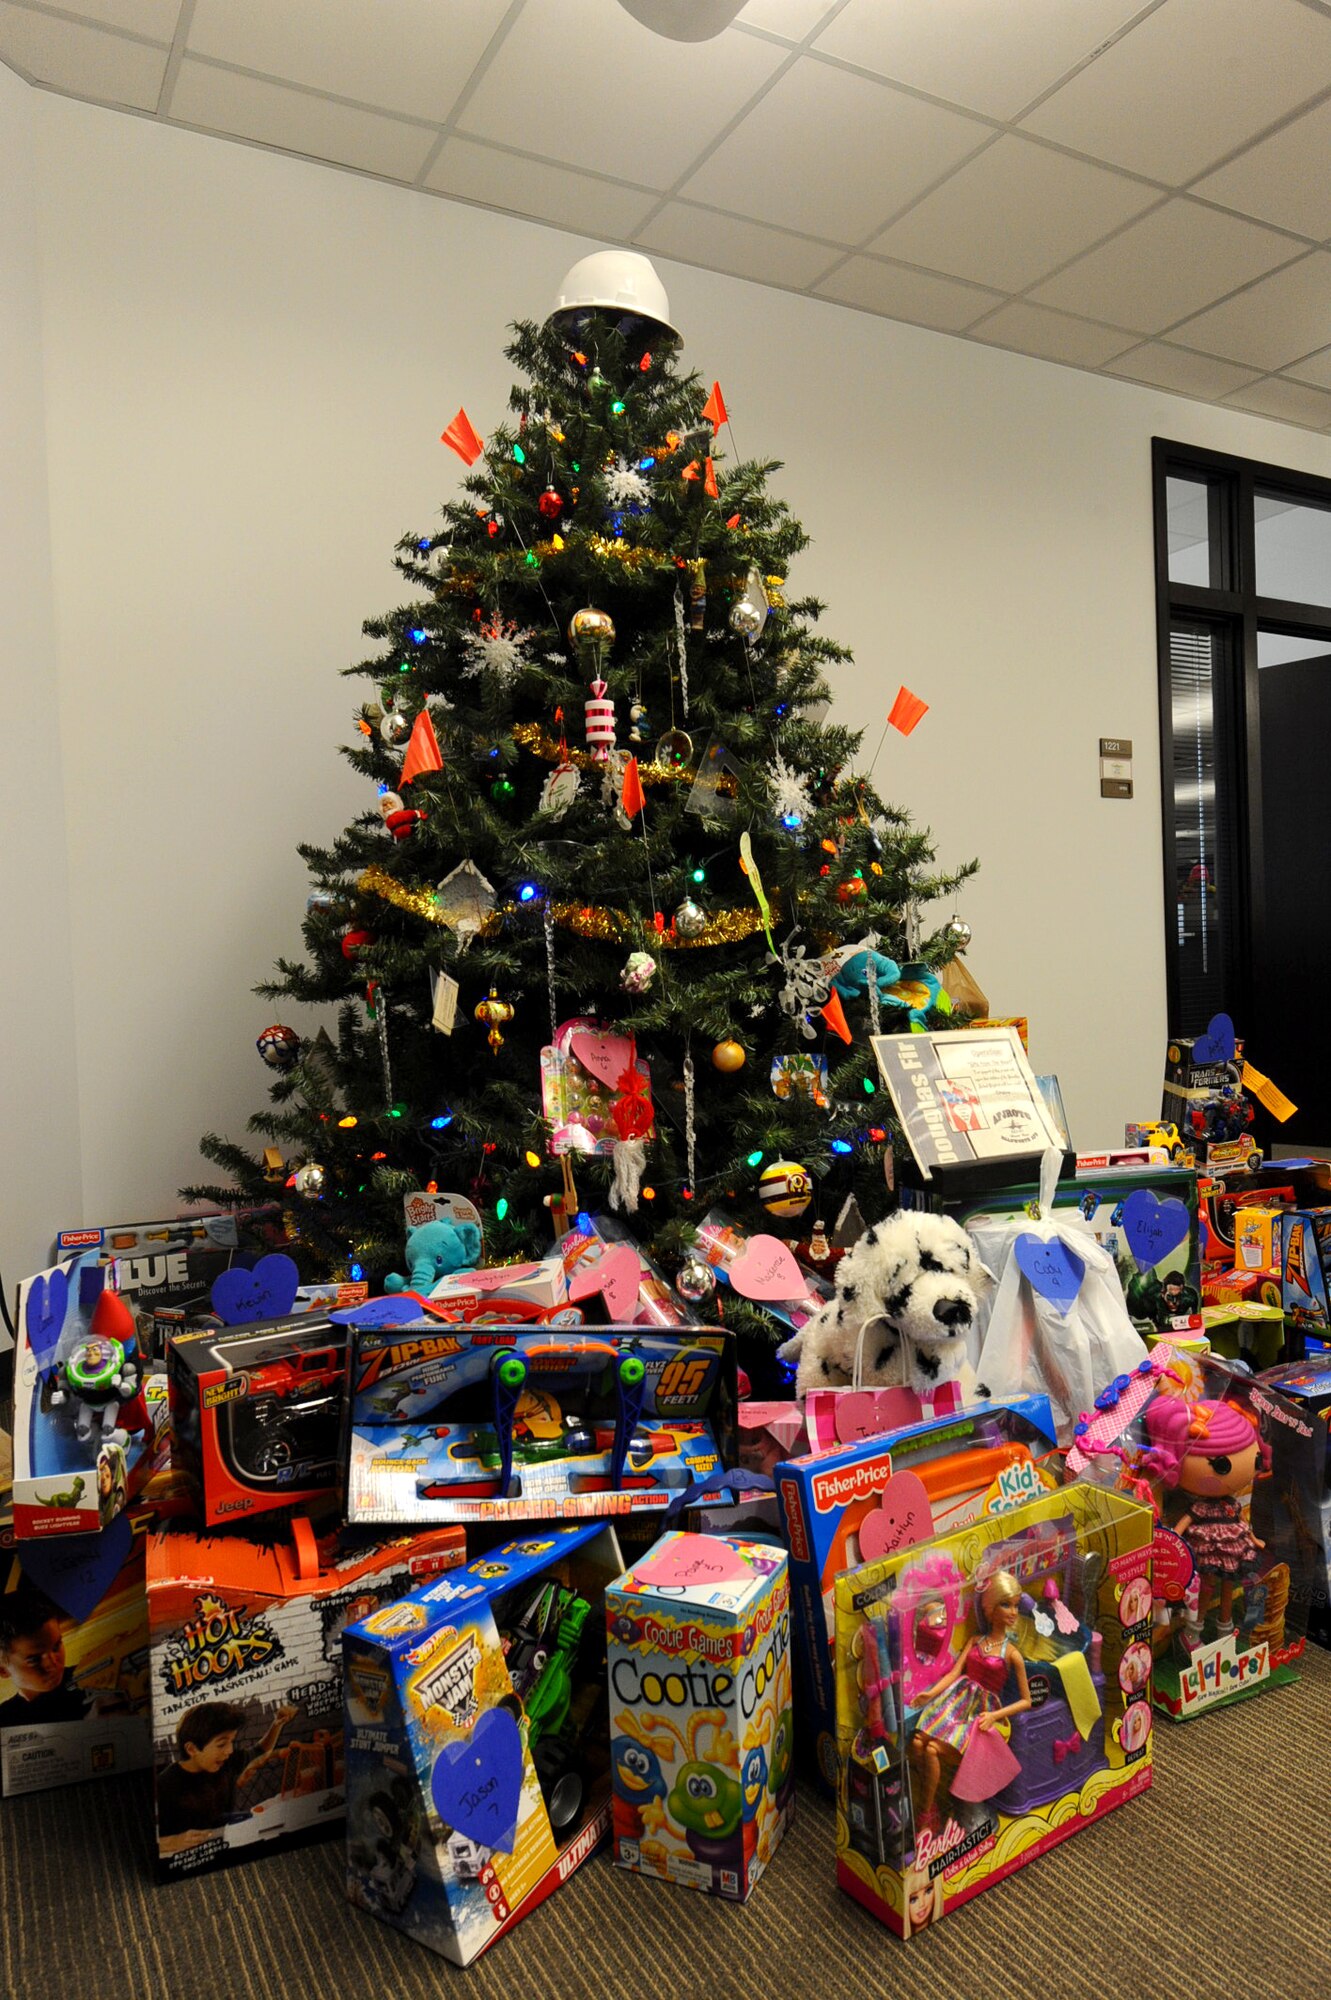 The Gifts from the Heart tree at the 28th Civil Engineer Squadron headquarters building is surrounded with gifts donated by Airmen and their families at Ellsworth Air Force Base, S.D., Dec. 13, 2011. More than 150 gifts were gathered and provided to the Douglas High School Junior Reserve Officer Training Corps program in Box Elder, S.D. who will distribute them to underprivileged children in the area. (U.S. Air Force photo by Airman 1st Class Zachary Hada/Released)